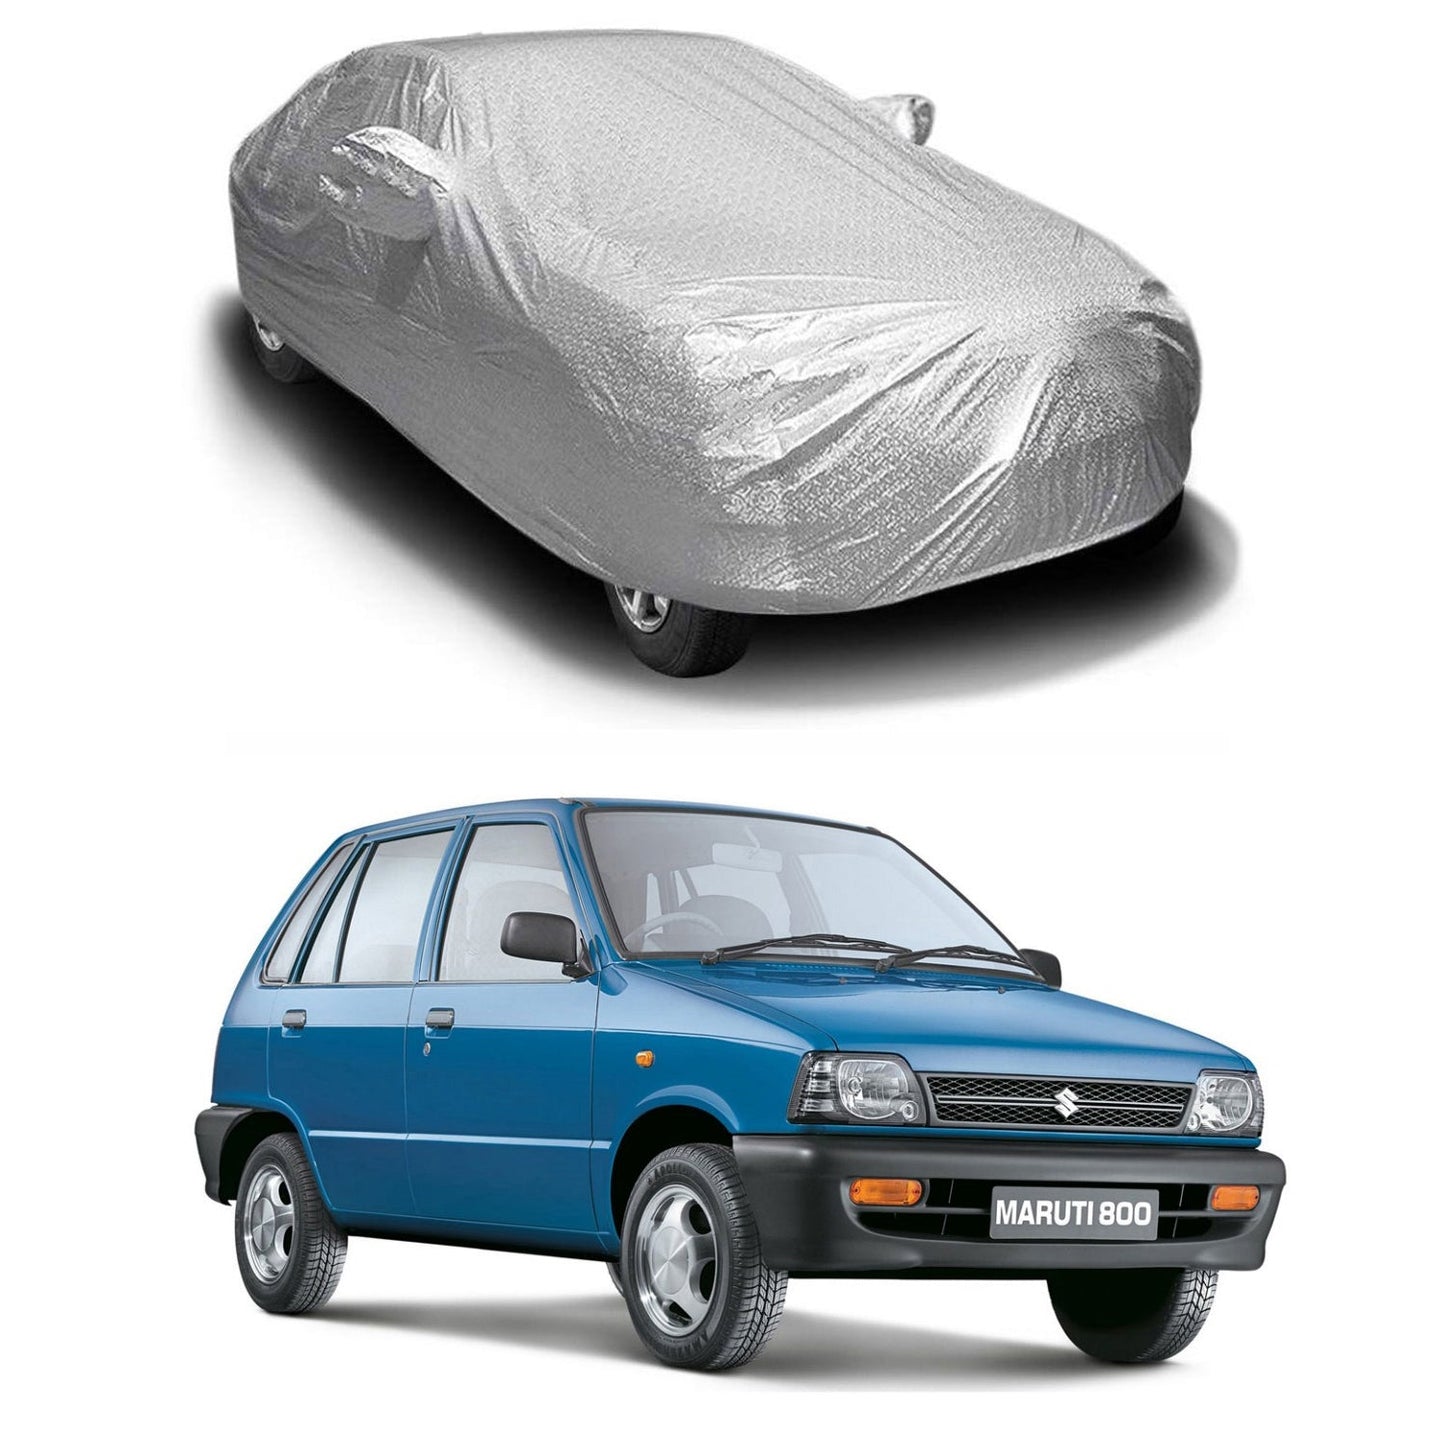 Oshotto Spyro Silver Anti Reflective, dustproof and Water Proof Car Body Cover with Mirror Pockets For Maruti Suzuki 800